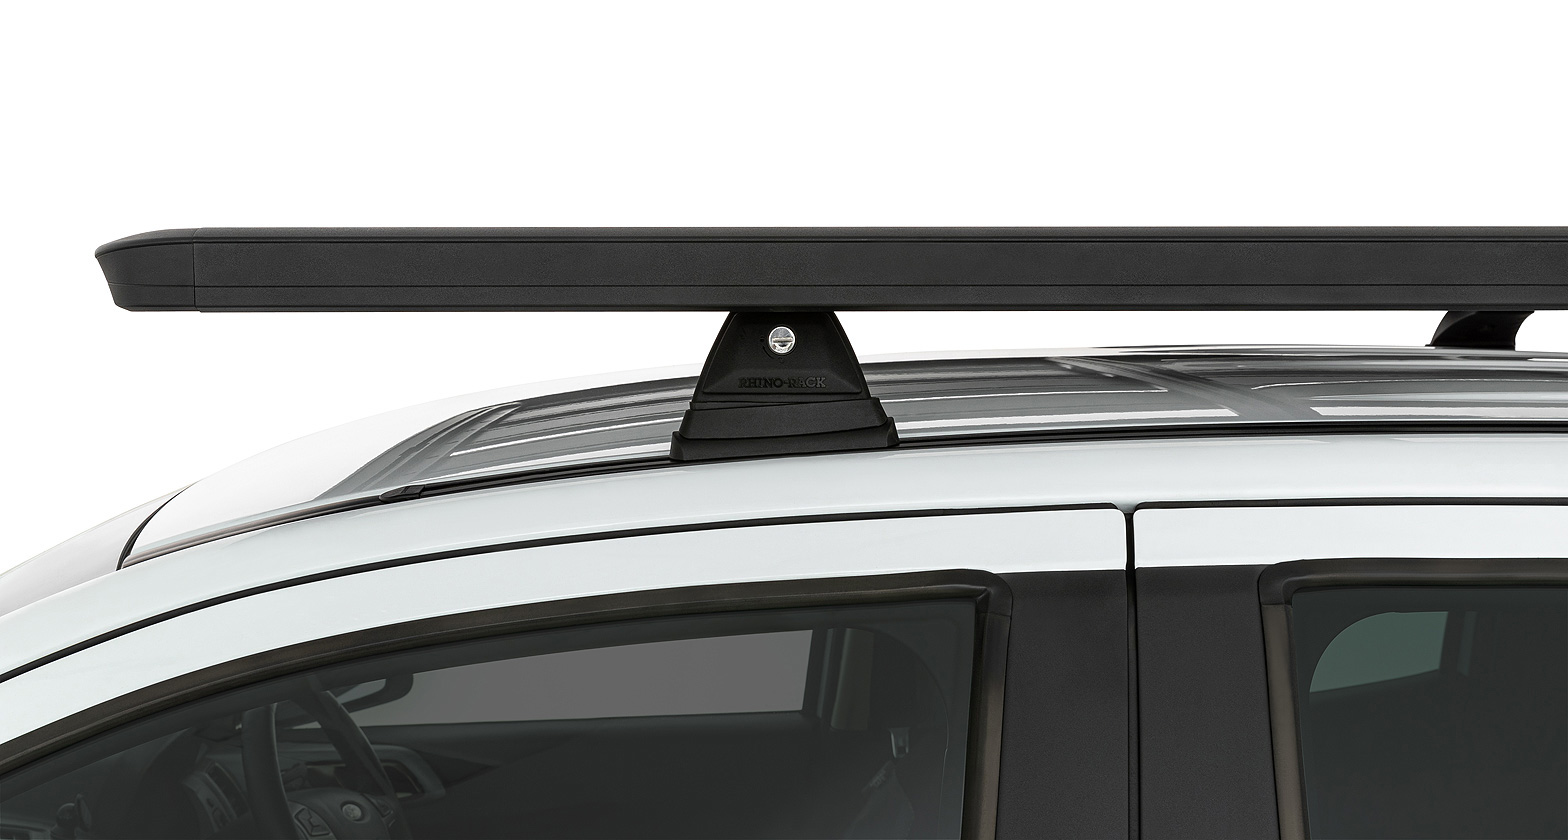 Rhino Rack JC-01643 Pioneer 6 Platform (1800mm x 1430mm) with RCH Legs suits Toyota Land Cruiser 5dr 200 Series with Bare Roof (2007 to 2022) - Factory Point Mount